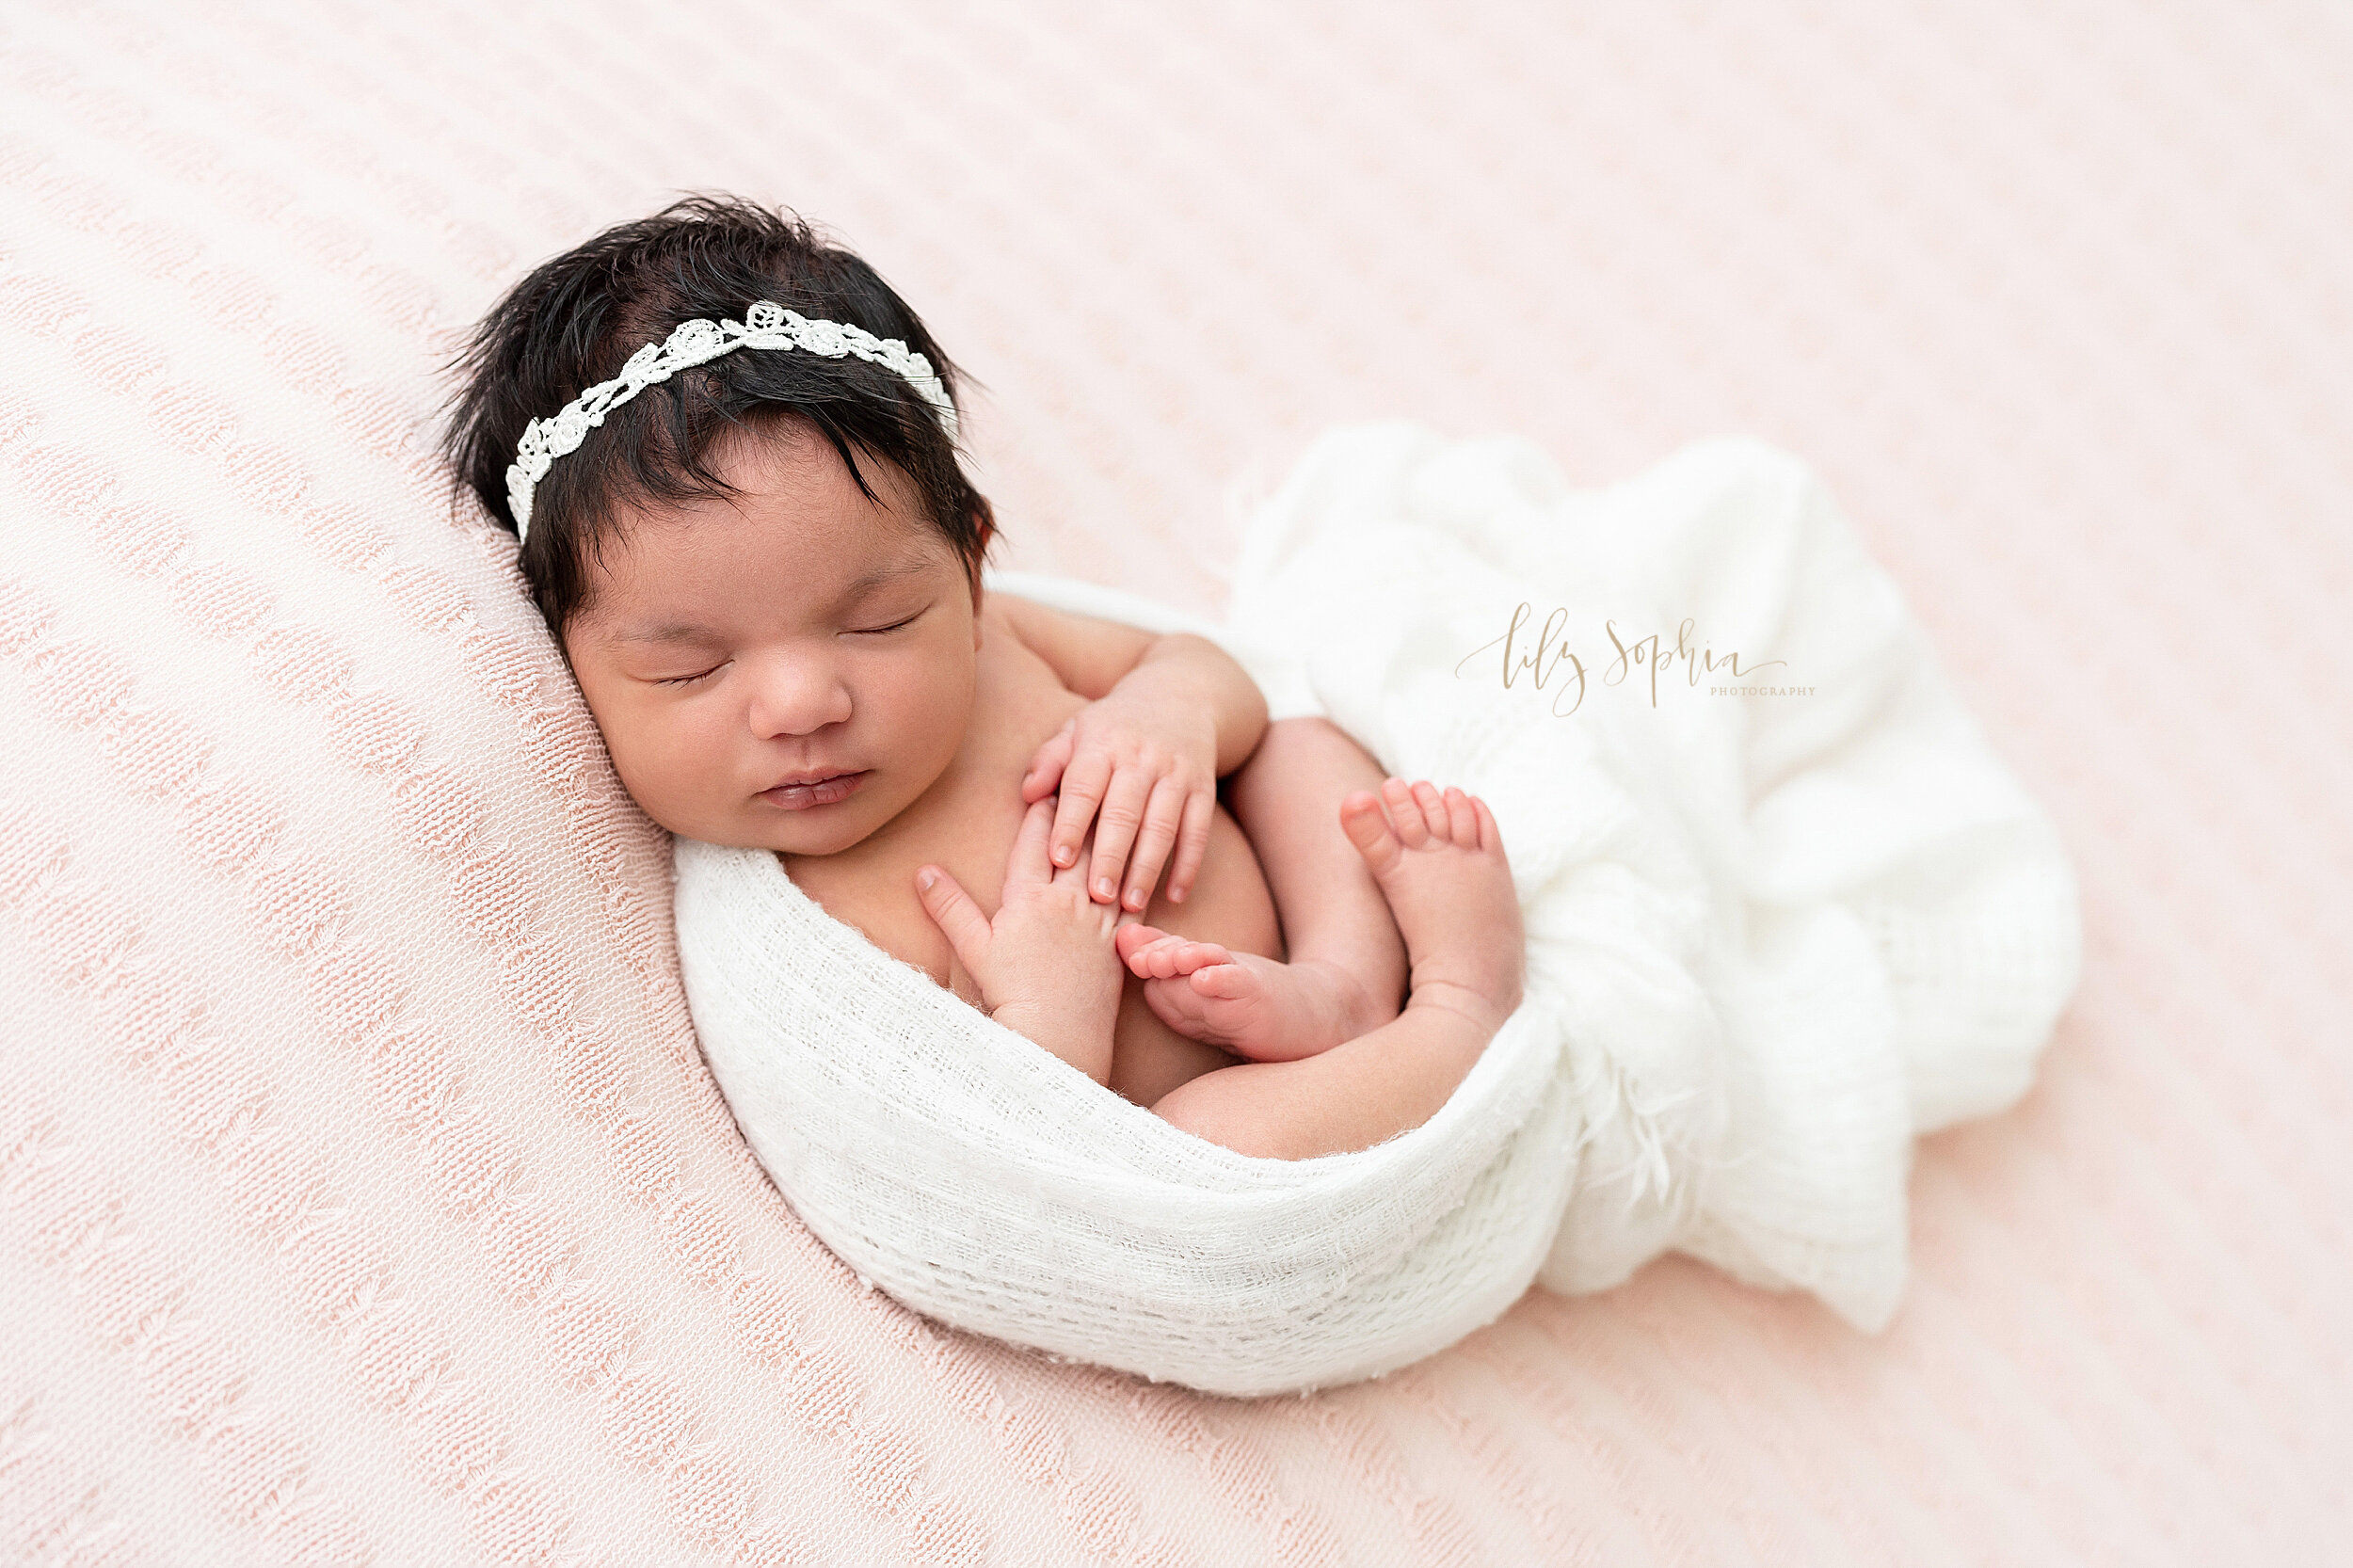  Newborn photo of a peacefully sleeping infant girl wearing a crocheted white headband in her dark hair as she lies on her back on a pink blanket with her hands on her chest and her body cradled in a stretchy white blanket. 